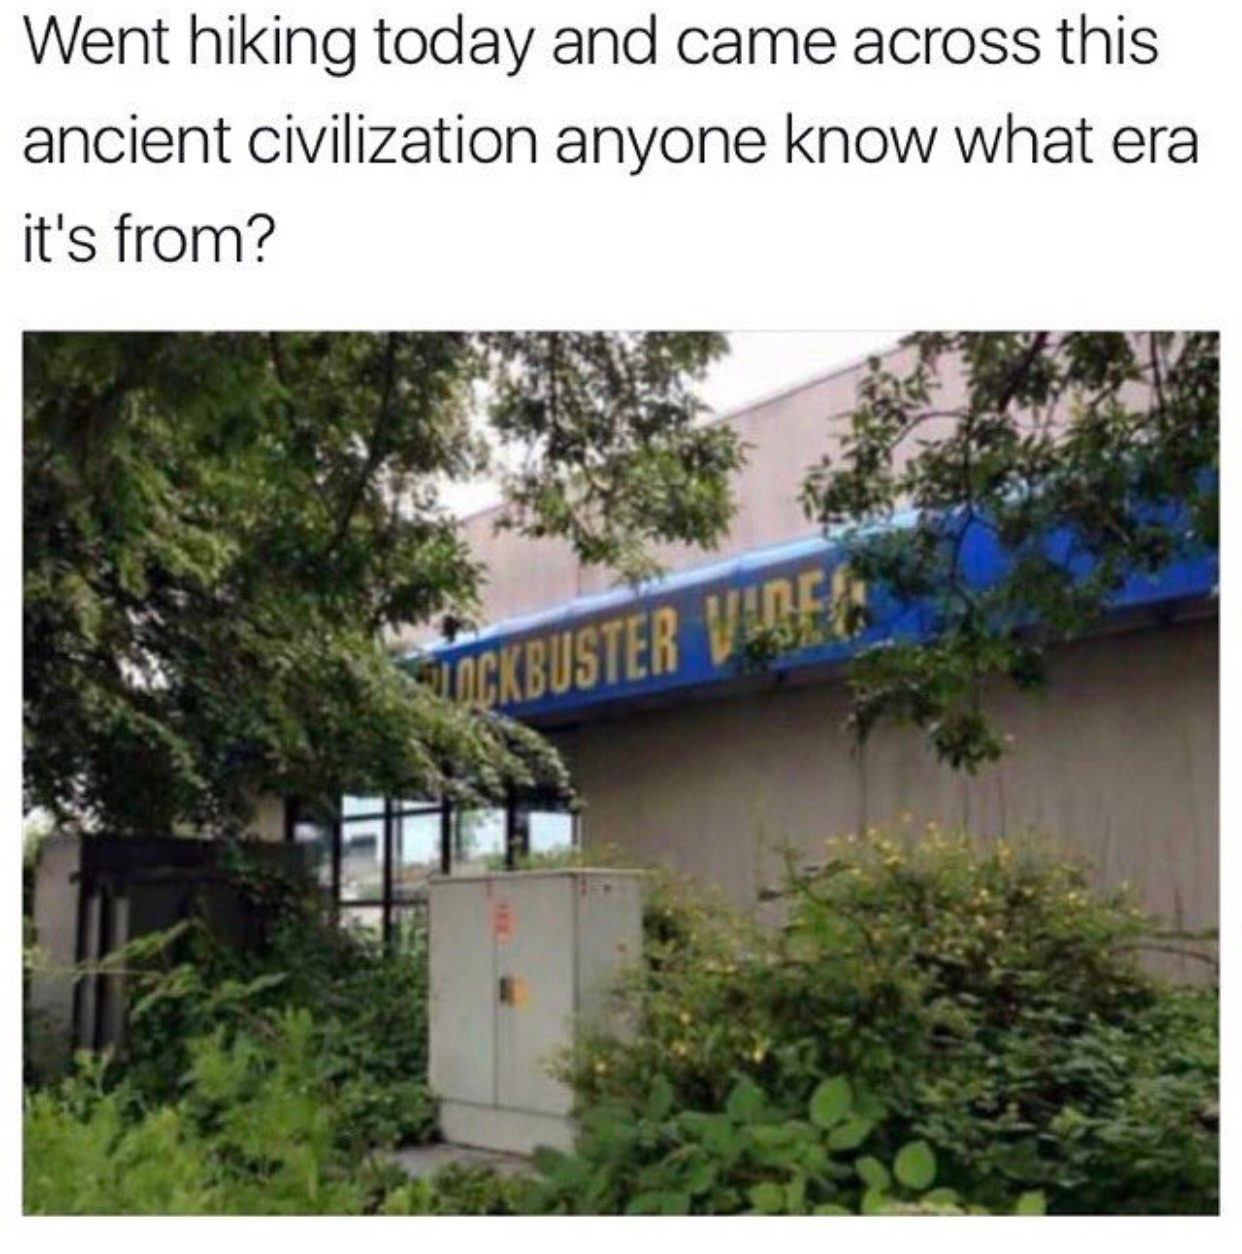 blockbuster meme - Went hiking today and came across this ancient civilization anyone know what era it's from? Lockbuster Ved